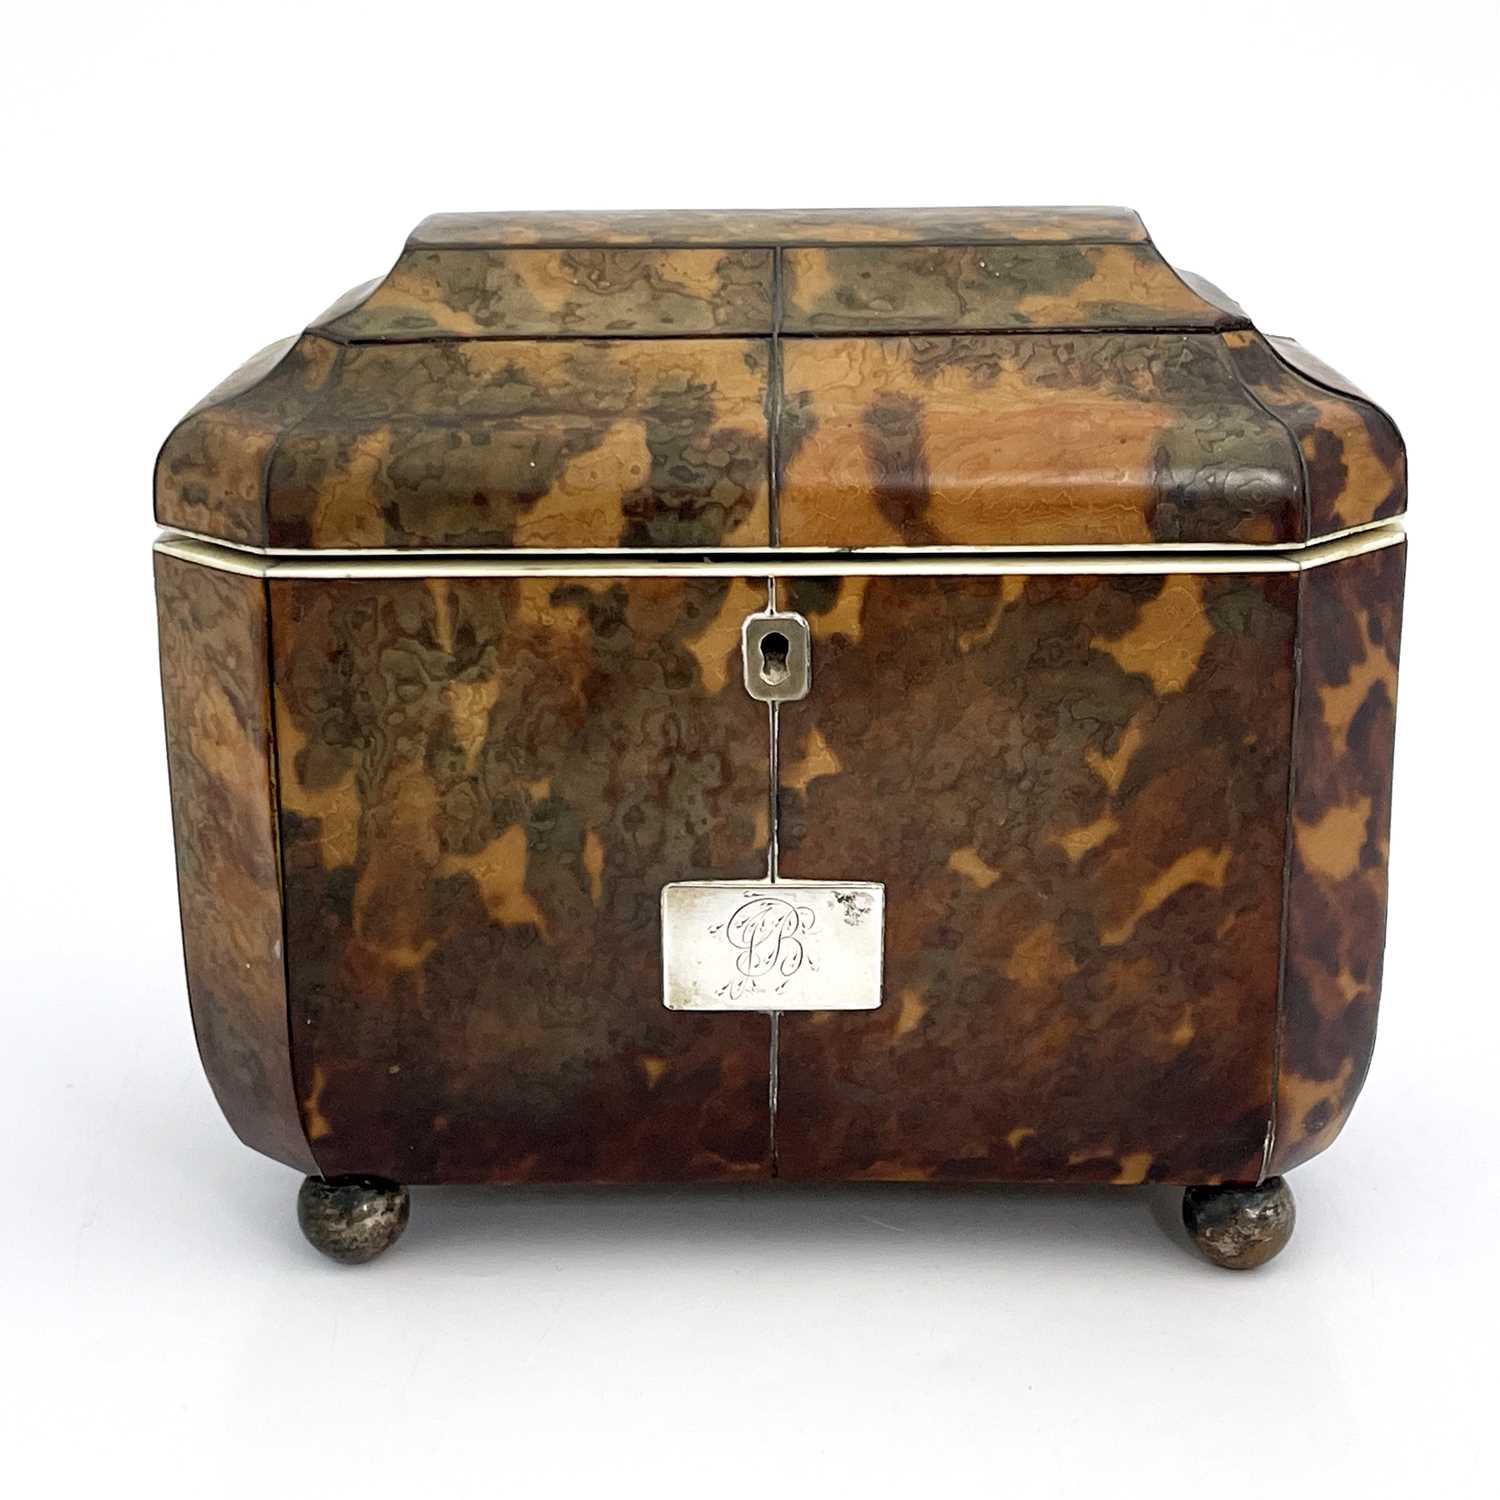 A Regency tortoiseshell tea caddy, circa 1820, of sarcophagus form, silver wire strung, white